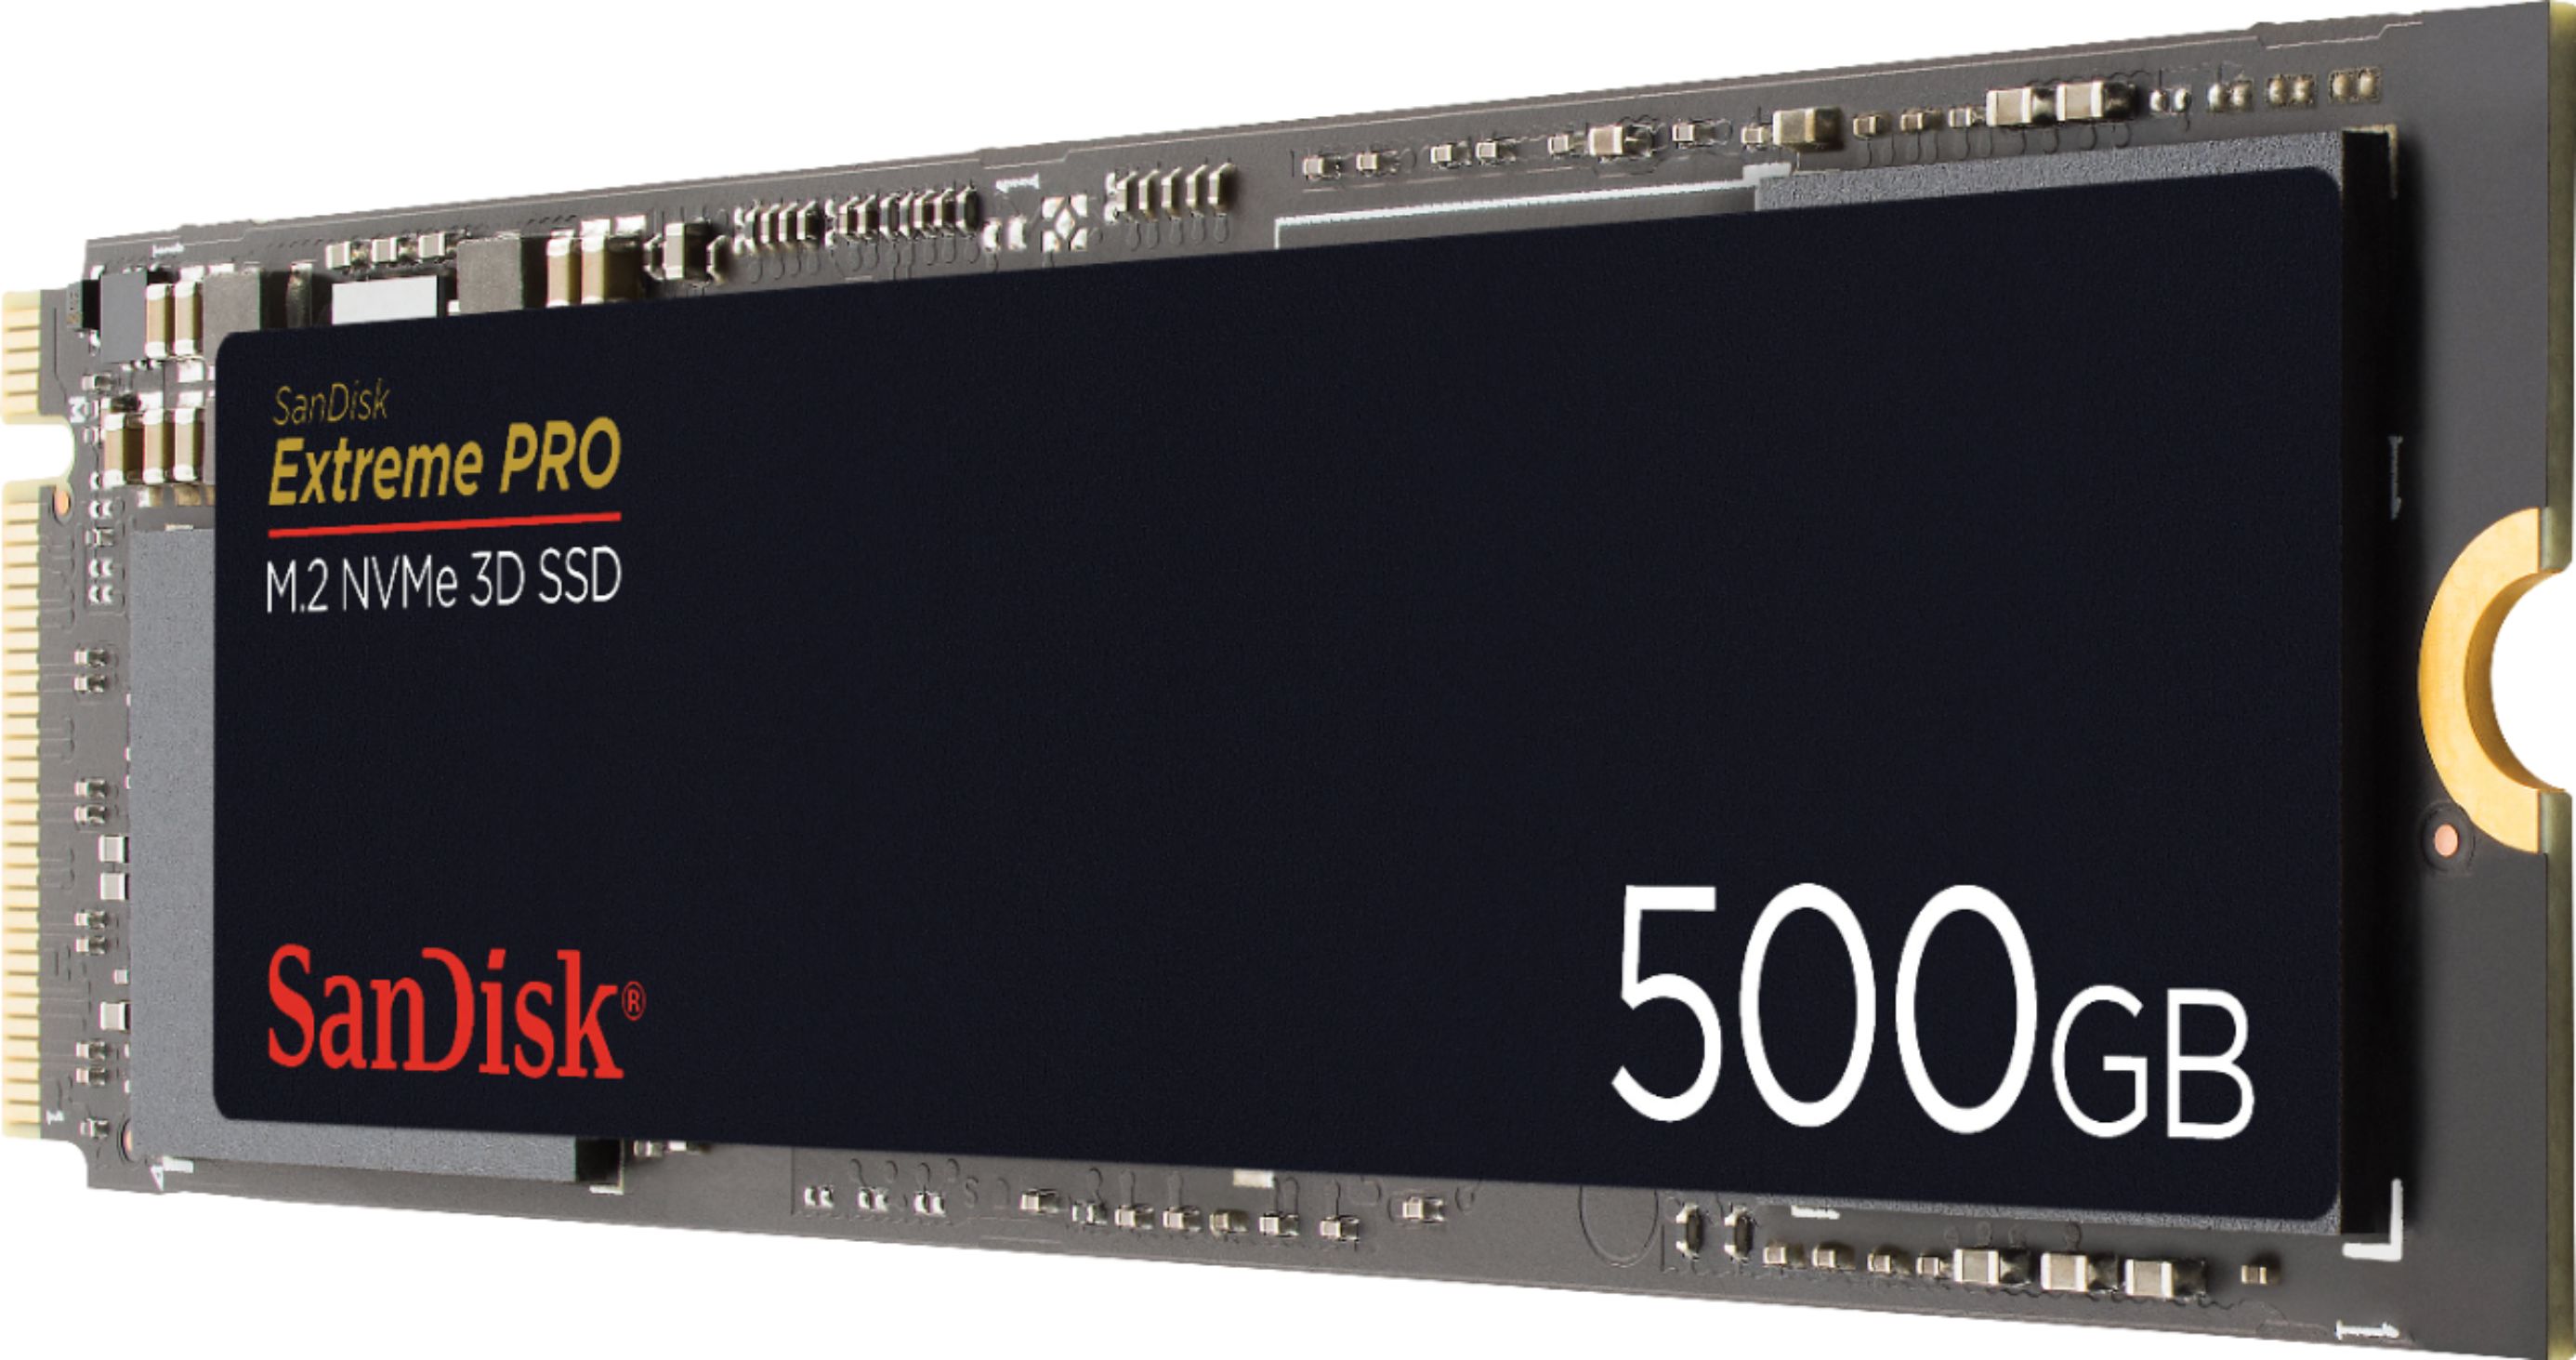 SanDisk - Extreme PRO 500GB Internal PCI Express 3.0 x4 (NVMe) Solid State Drive with 3D NAND Technology